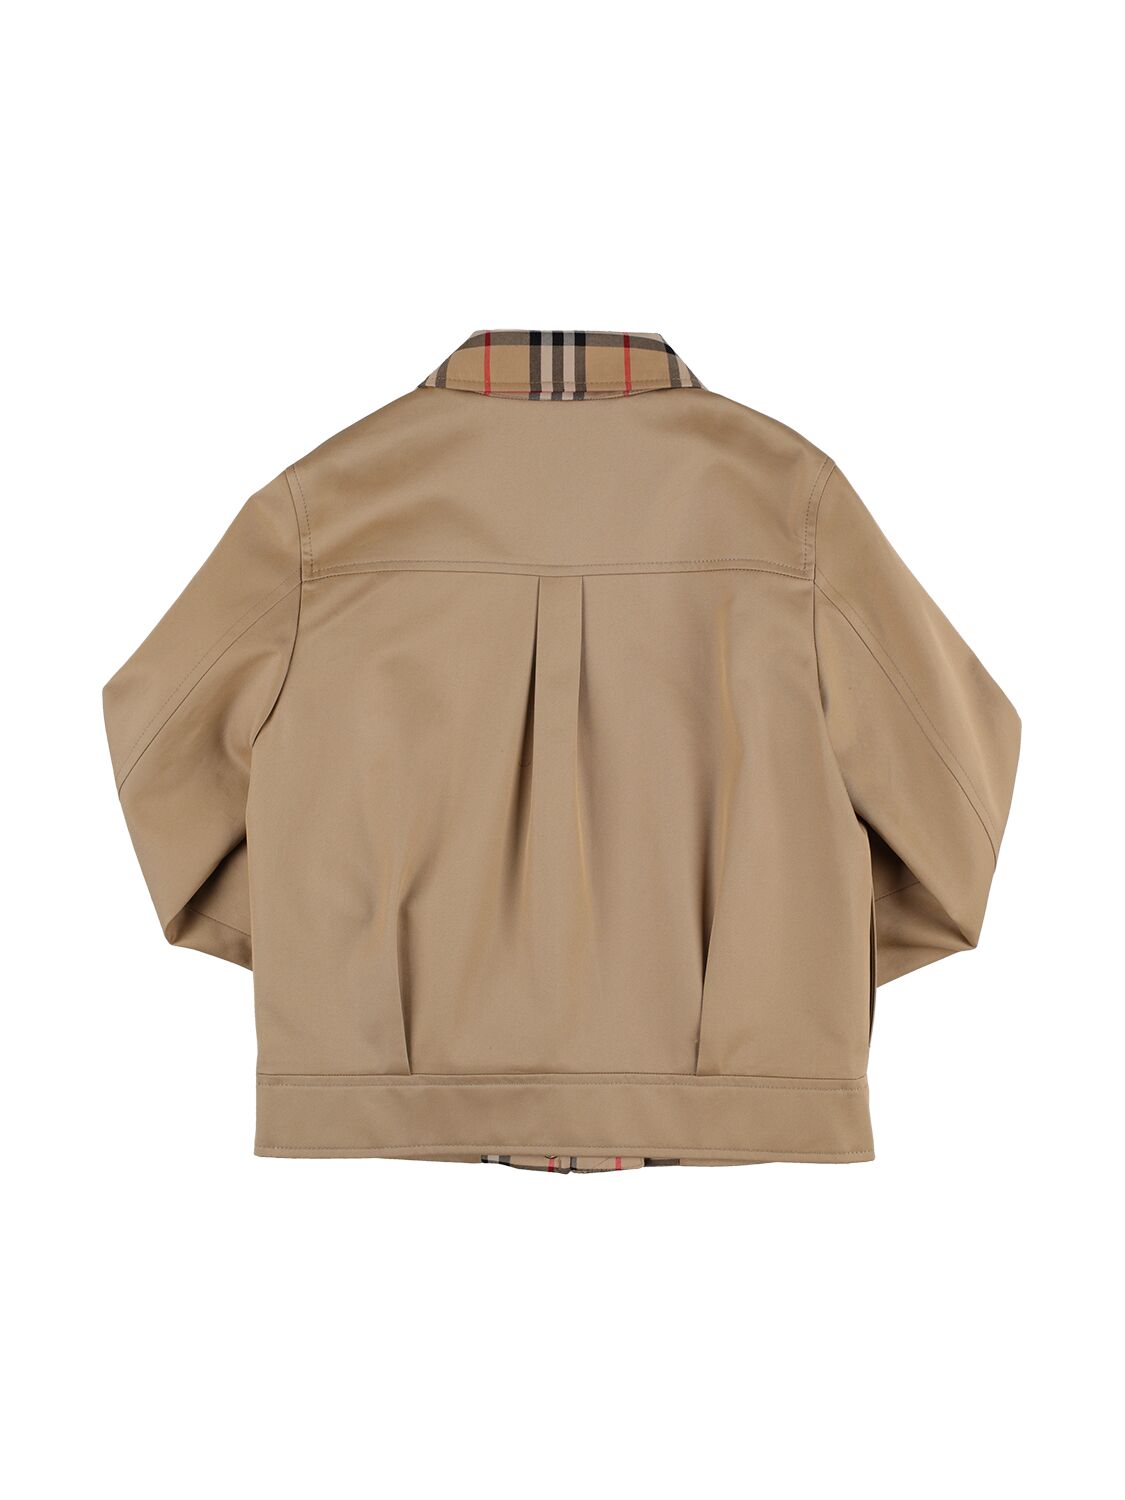 Shop Burberry Cotton Jacket W/ Check Inserts In Beige